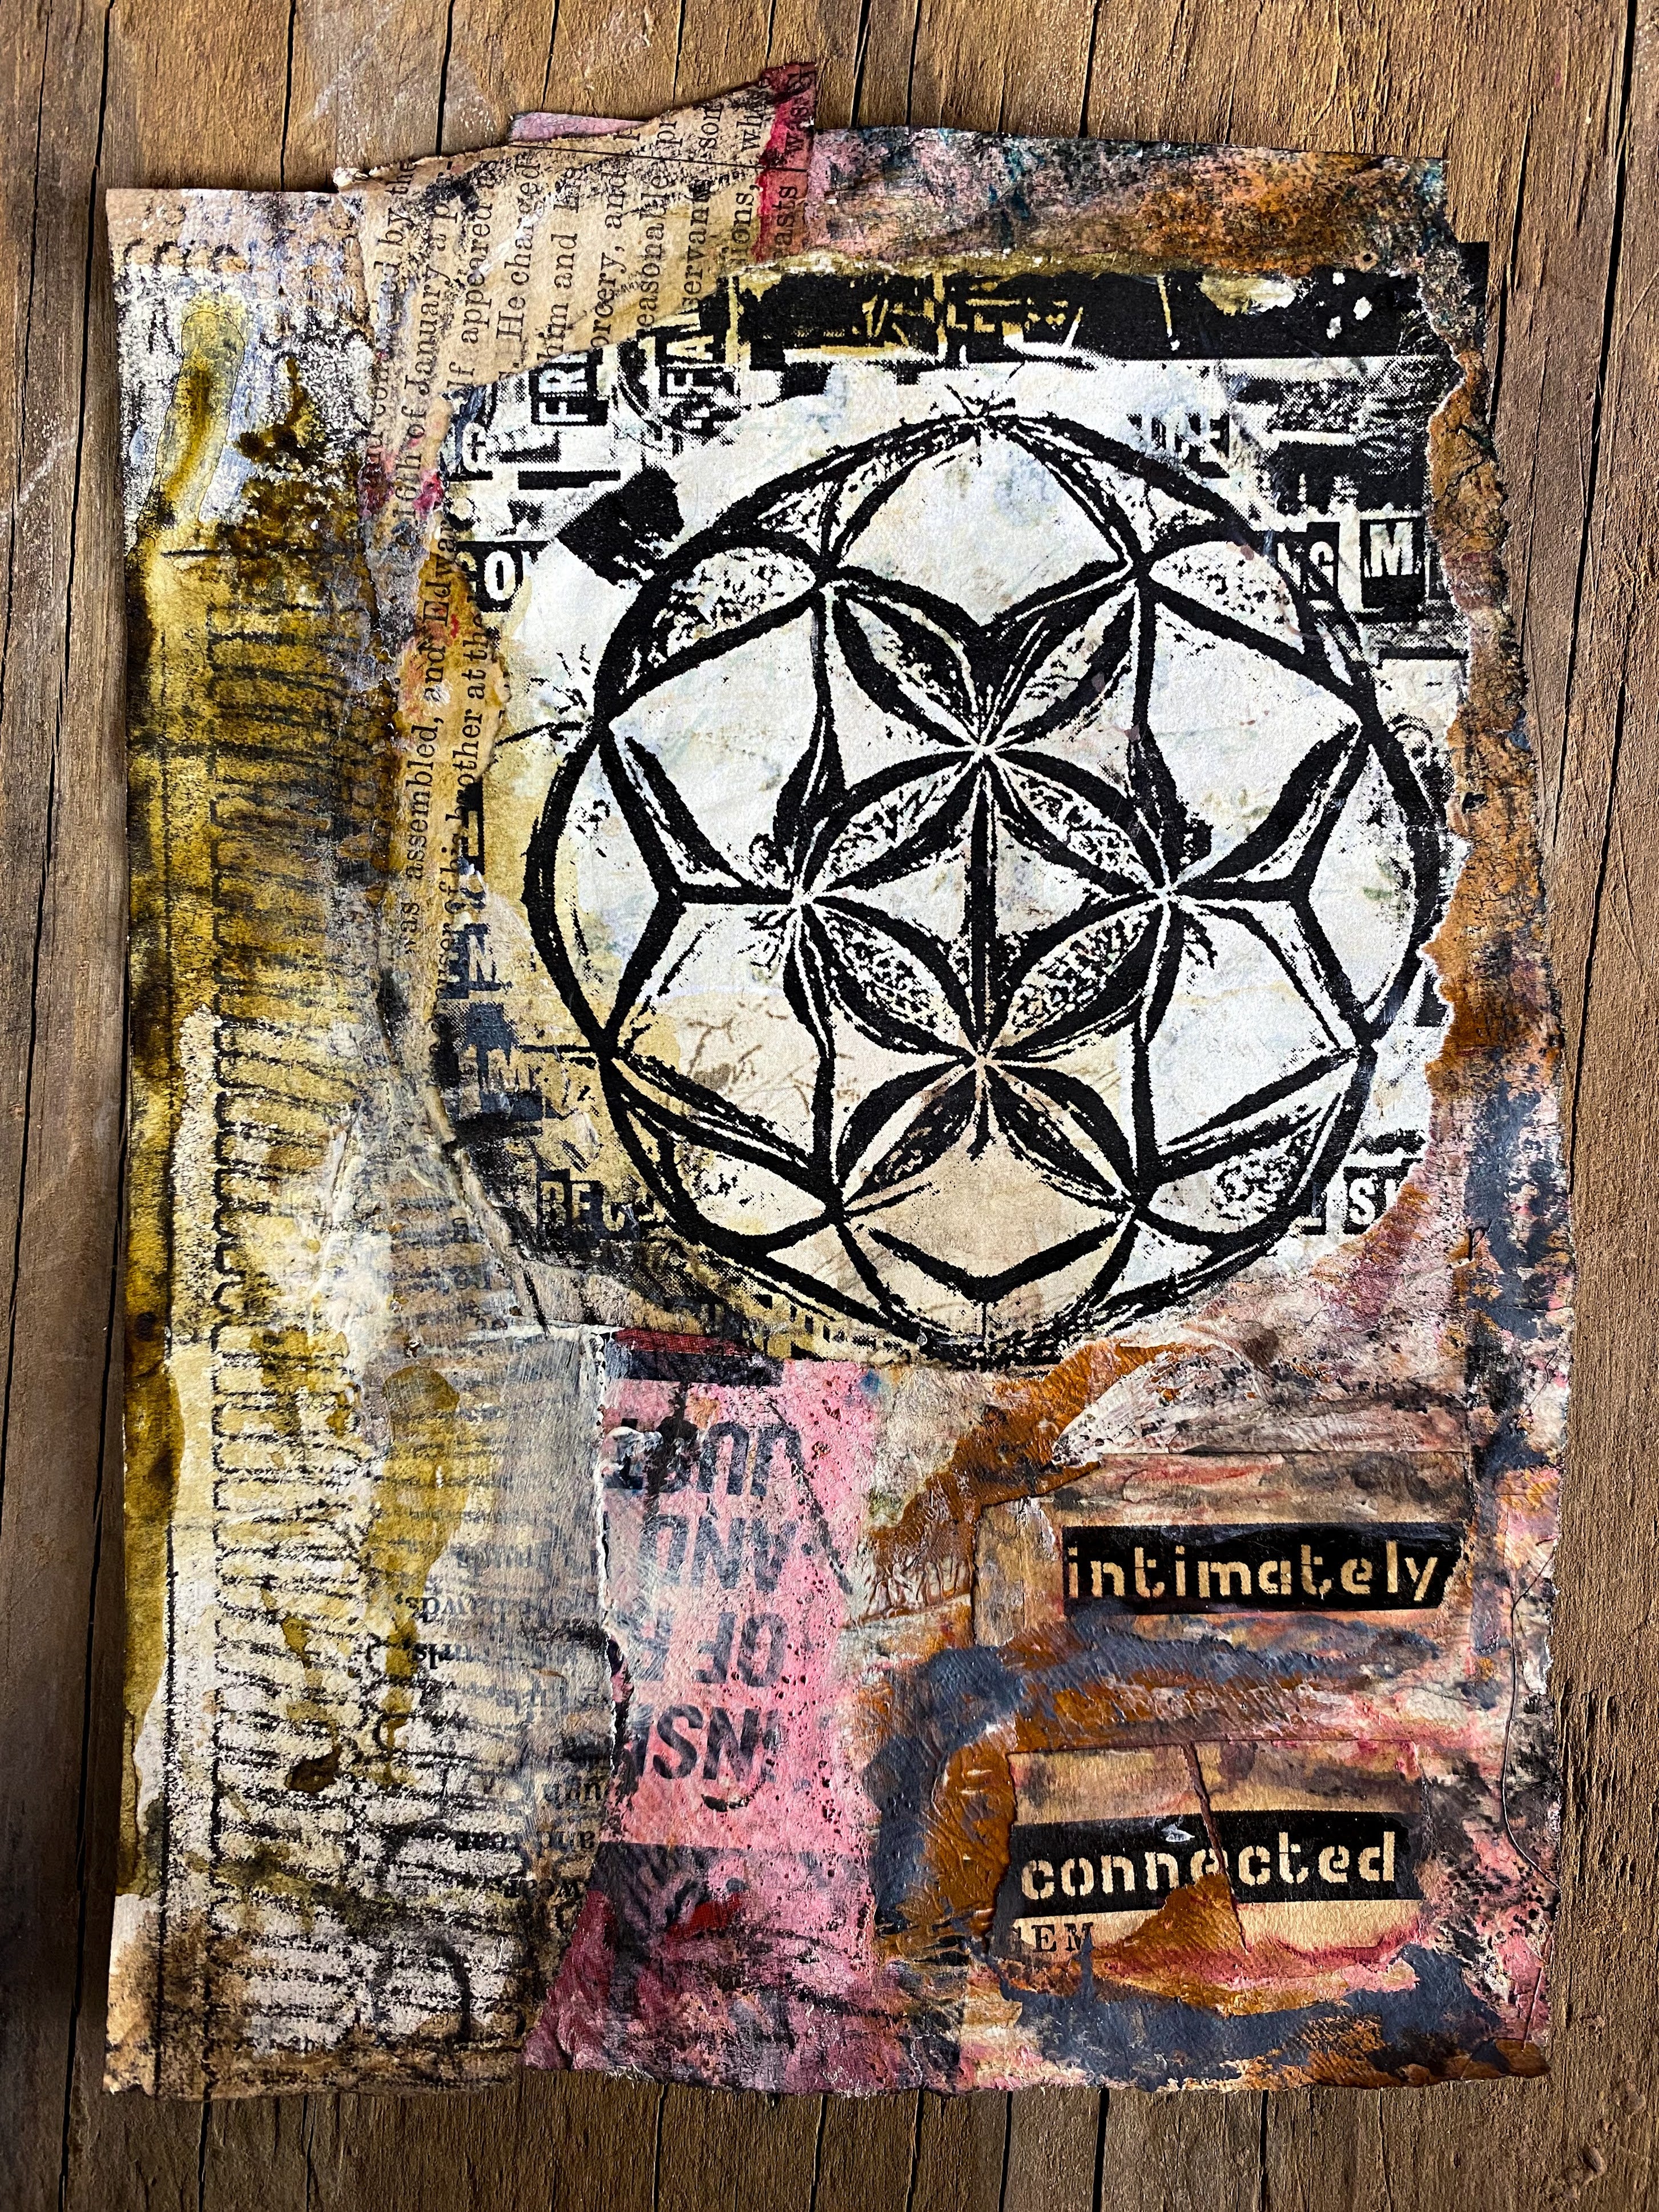 Intimately Connected - Original Mixed Media Collage